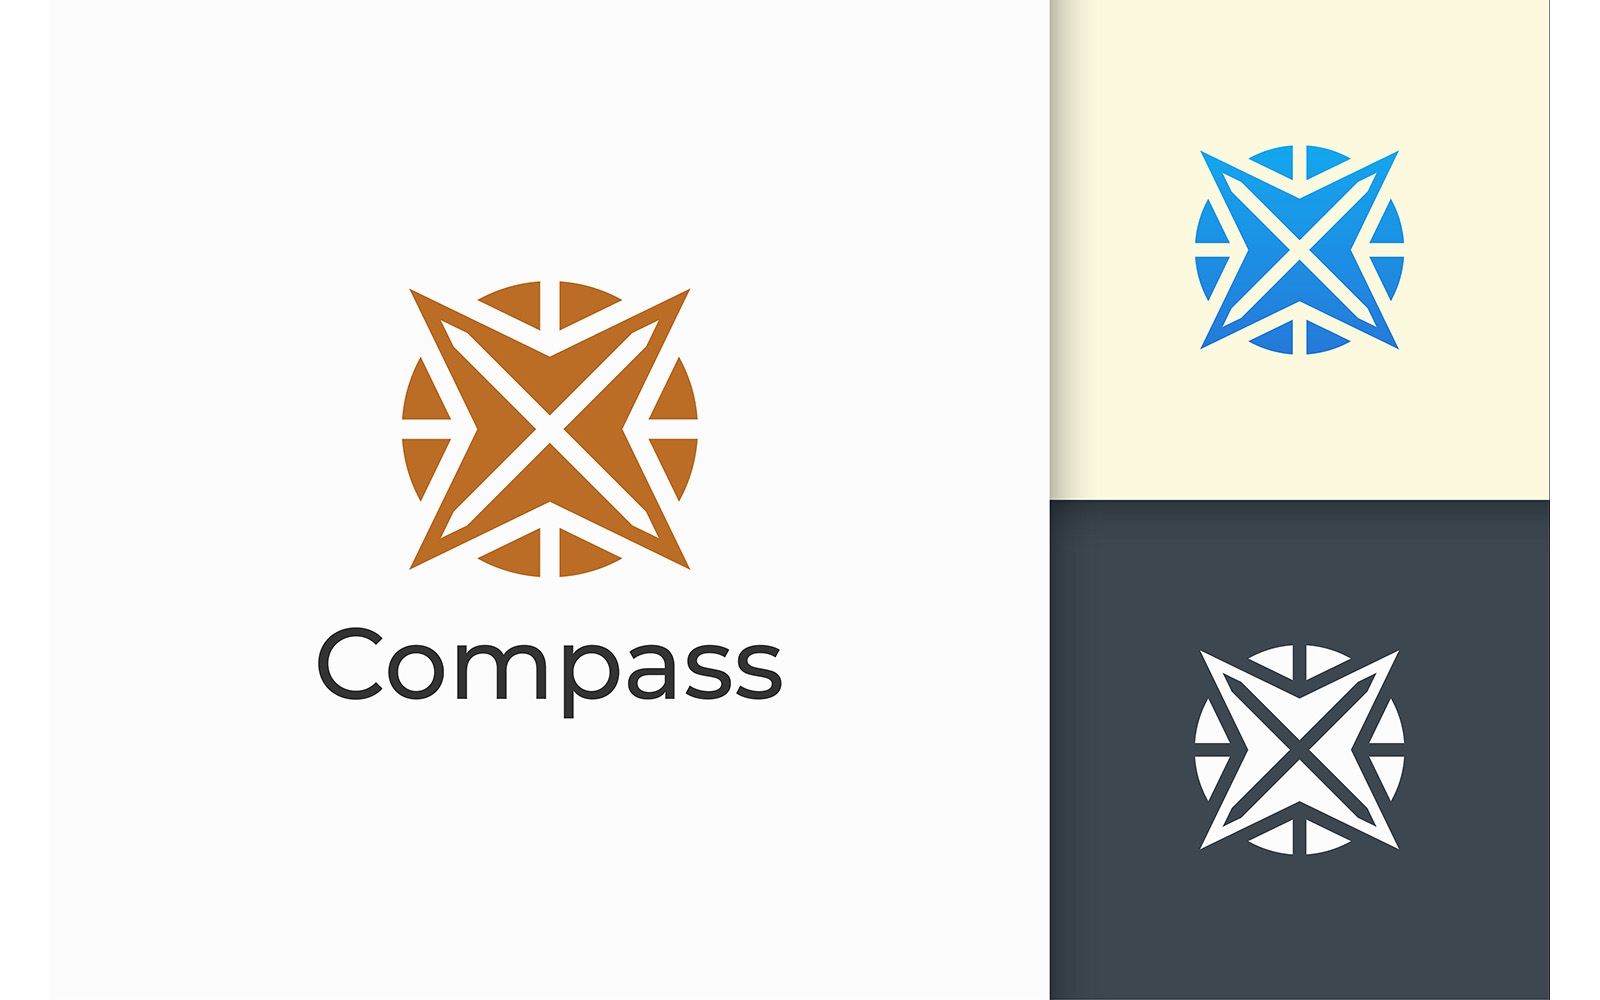 Compass Logo in Modern and Abstract Represent Journey